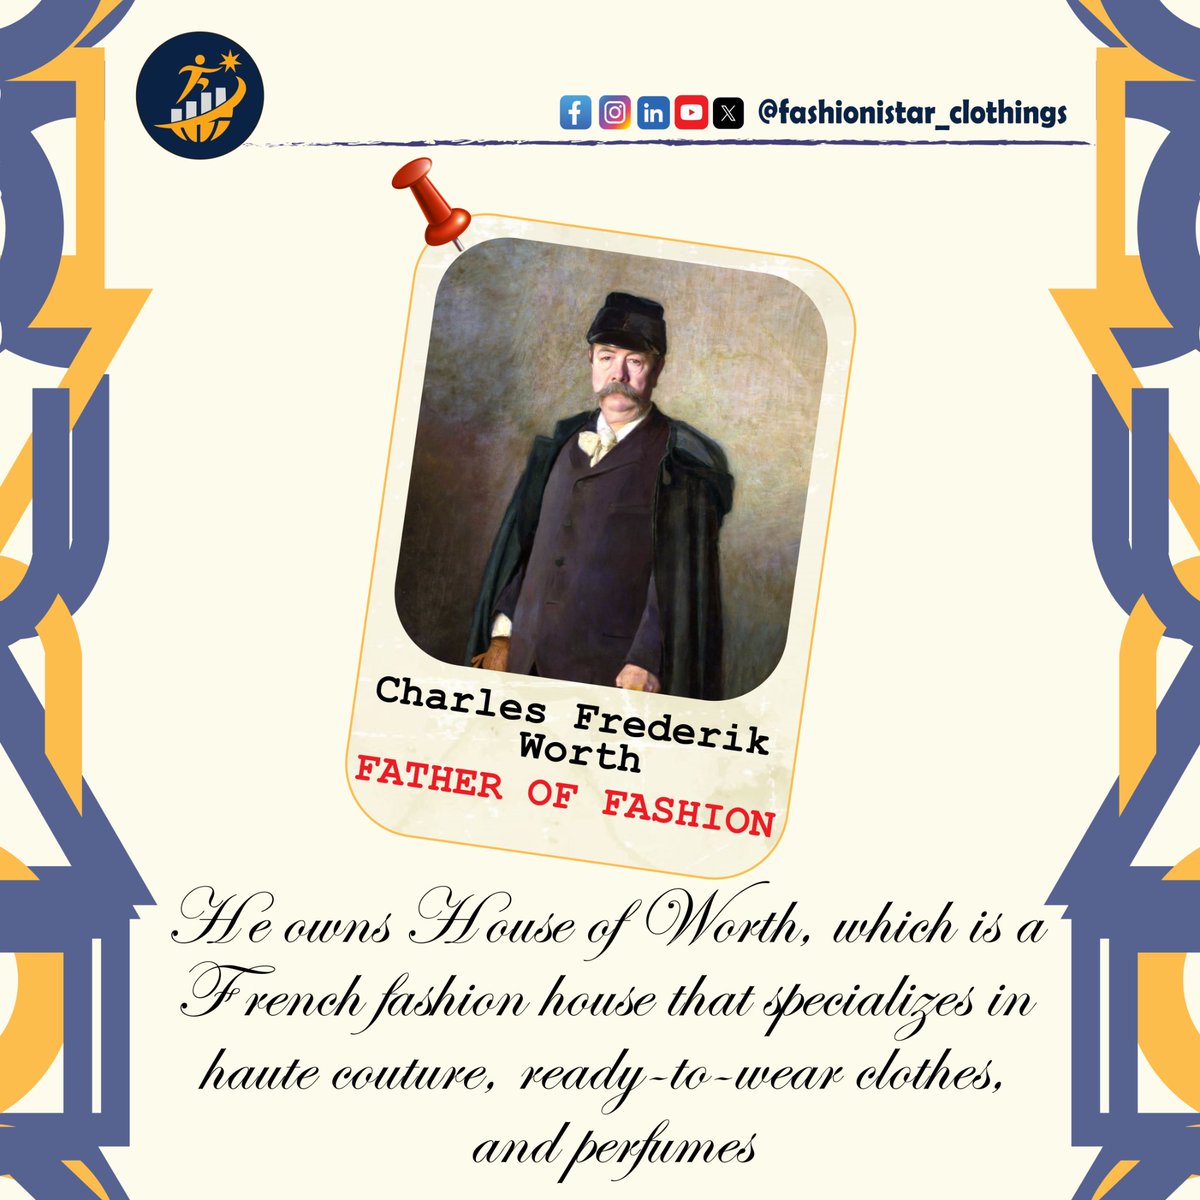 The father of fashion...... #fashionhistory #doyouknow #facts #viralpost